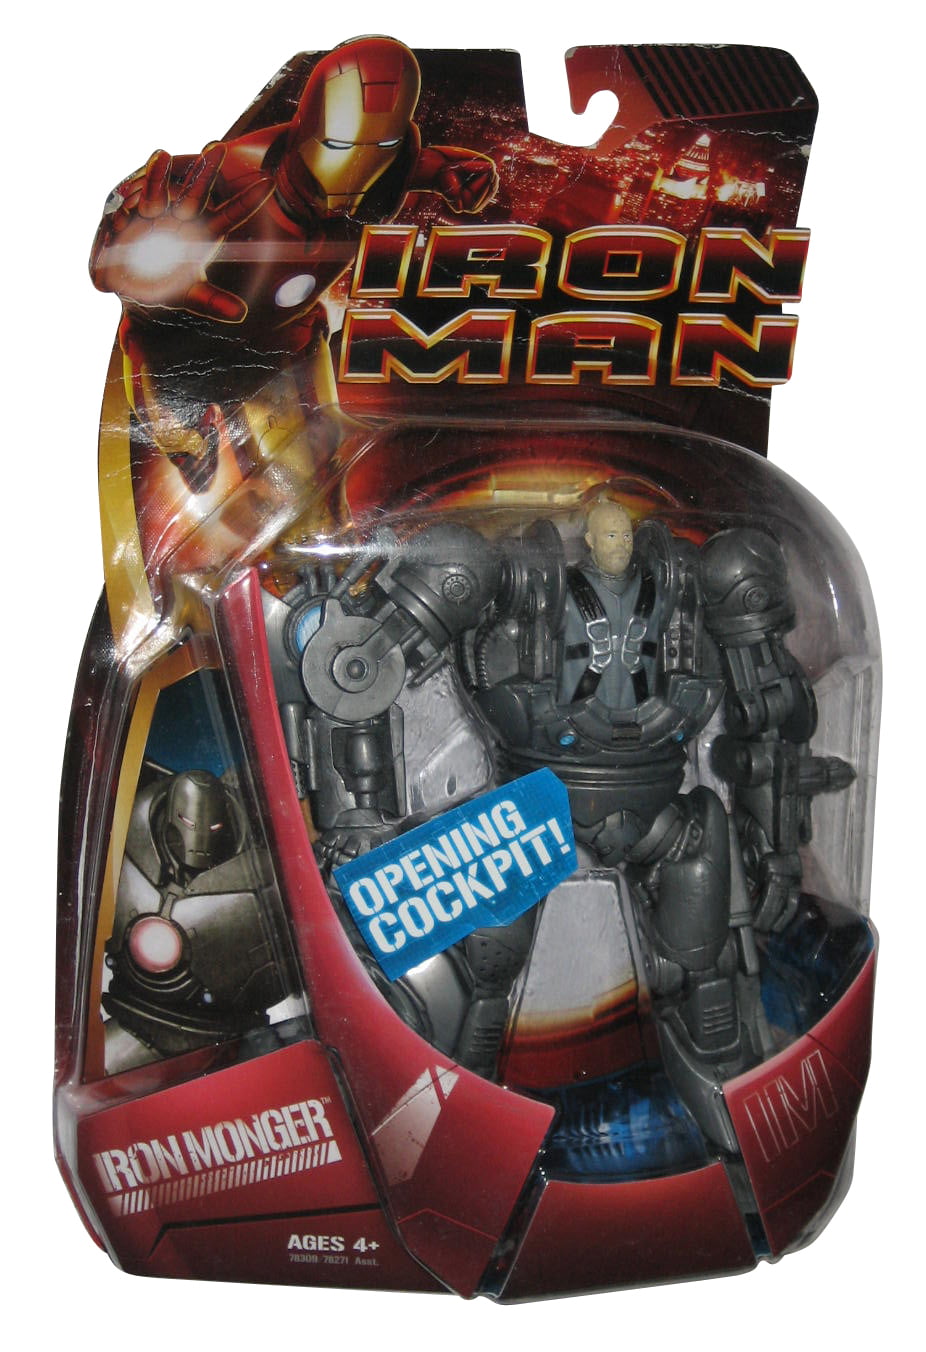 2007 Marvel IRON MAN Action Figure Toy With Punching Action Burger King 4.5" 